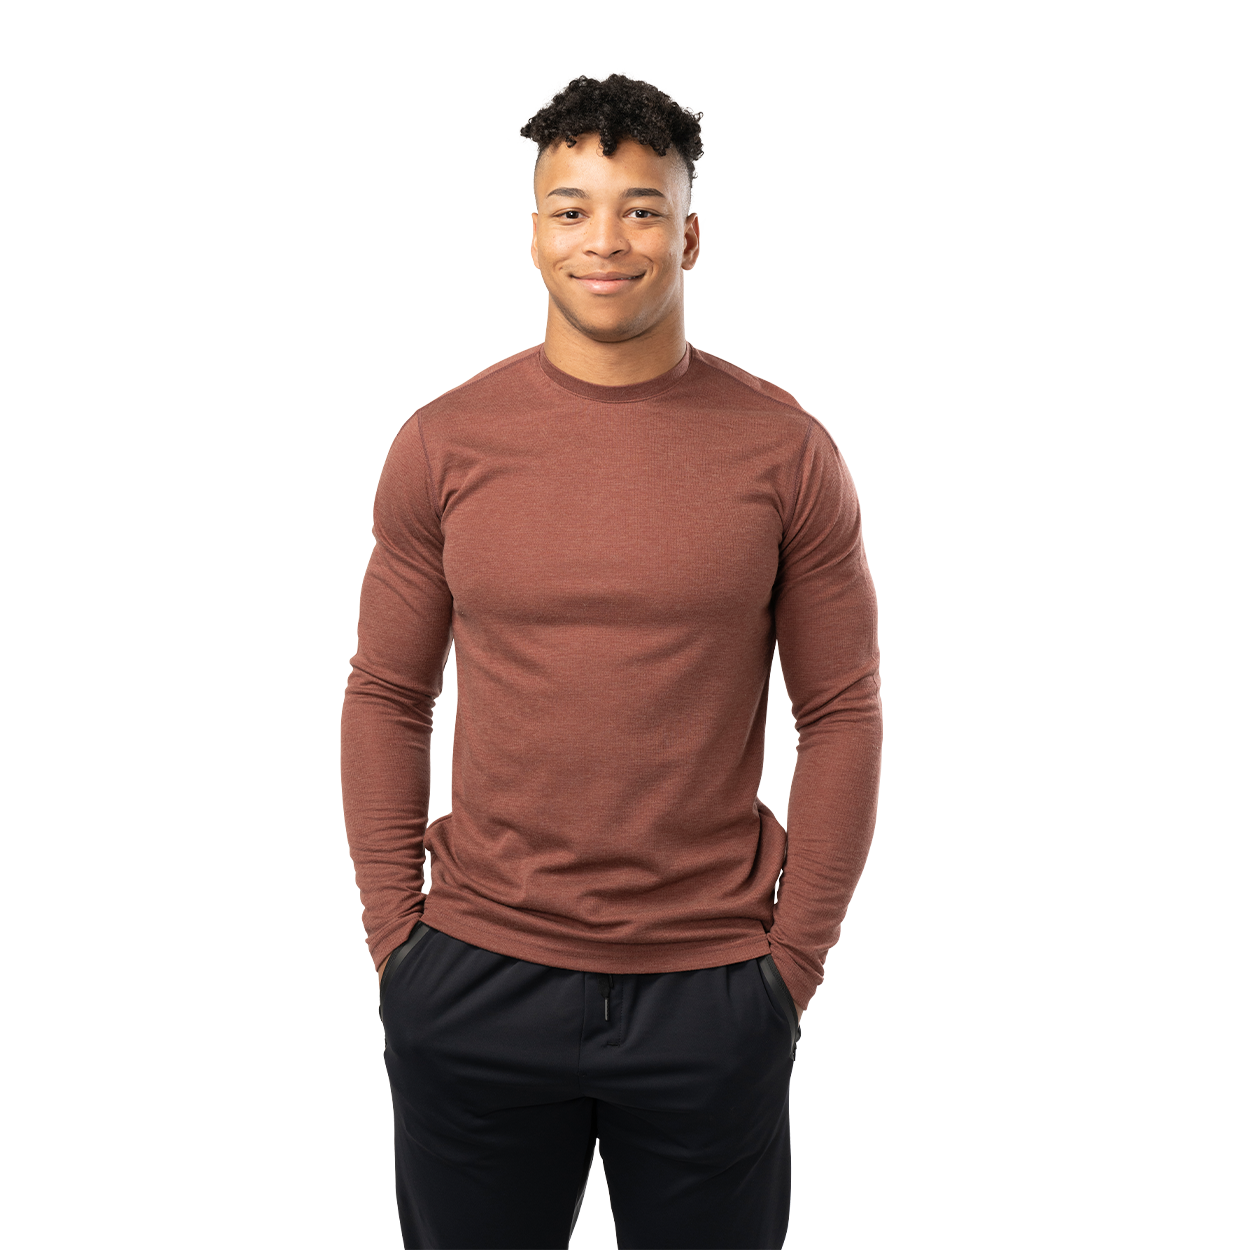 Gulf Mall Qatar - A casual classic you can wear any day of the week, our  essential sweatshirt won't go amiss in your winter wardrobe   @matalan_me  #matalan_me #gulfmallqatar #MatalanME #Mens